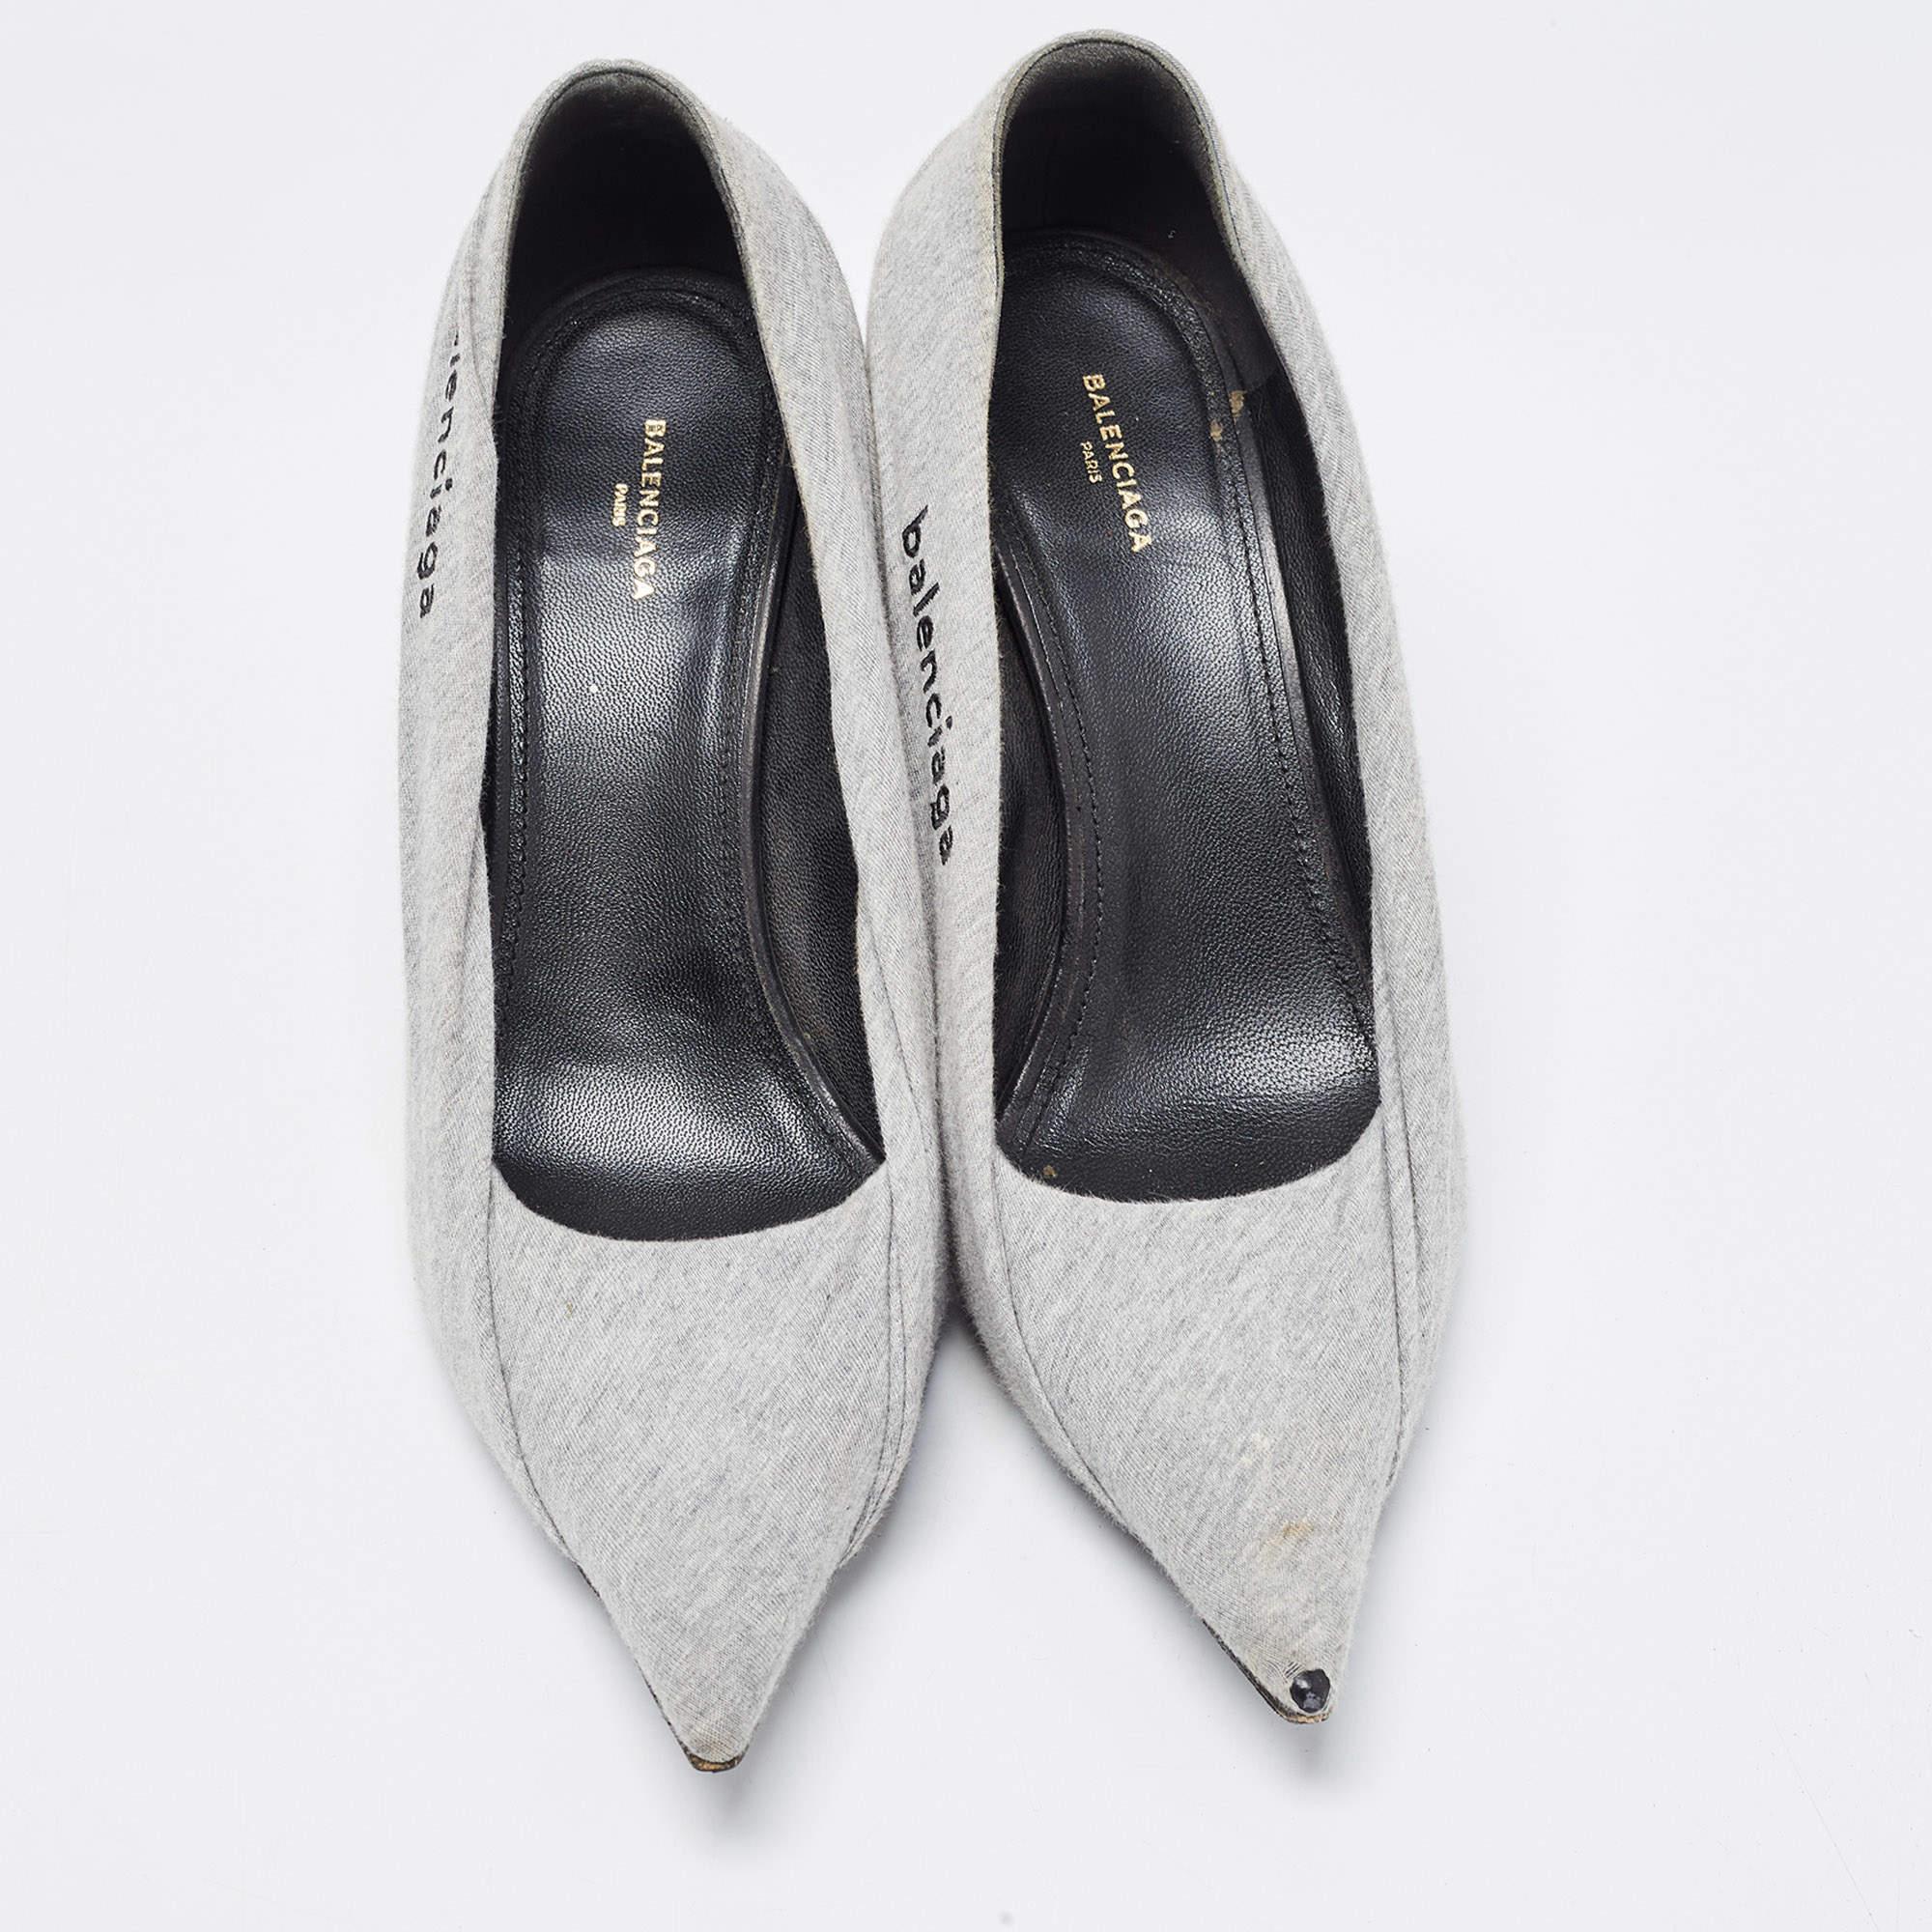 These timeless Balenciaga Knife pumps are meant to last you season after season. Crafted using grey fabric, they are designed with a sleek arch, pointed toes, and 9 cm heels.

Includes
Original Dustbag